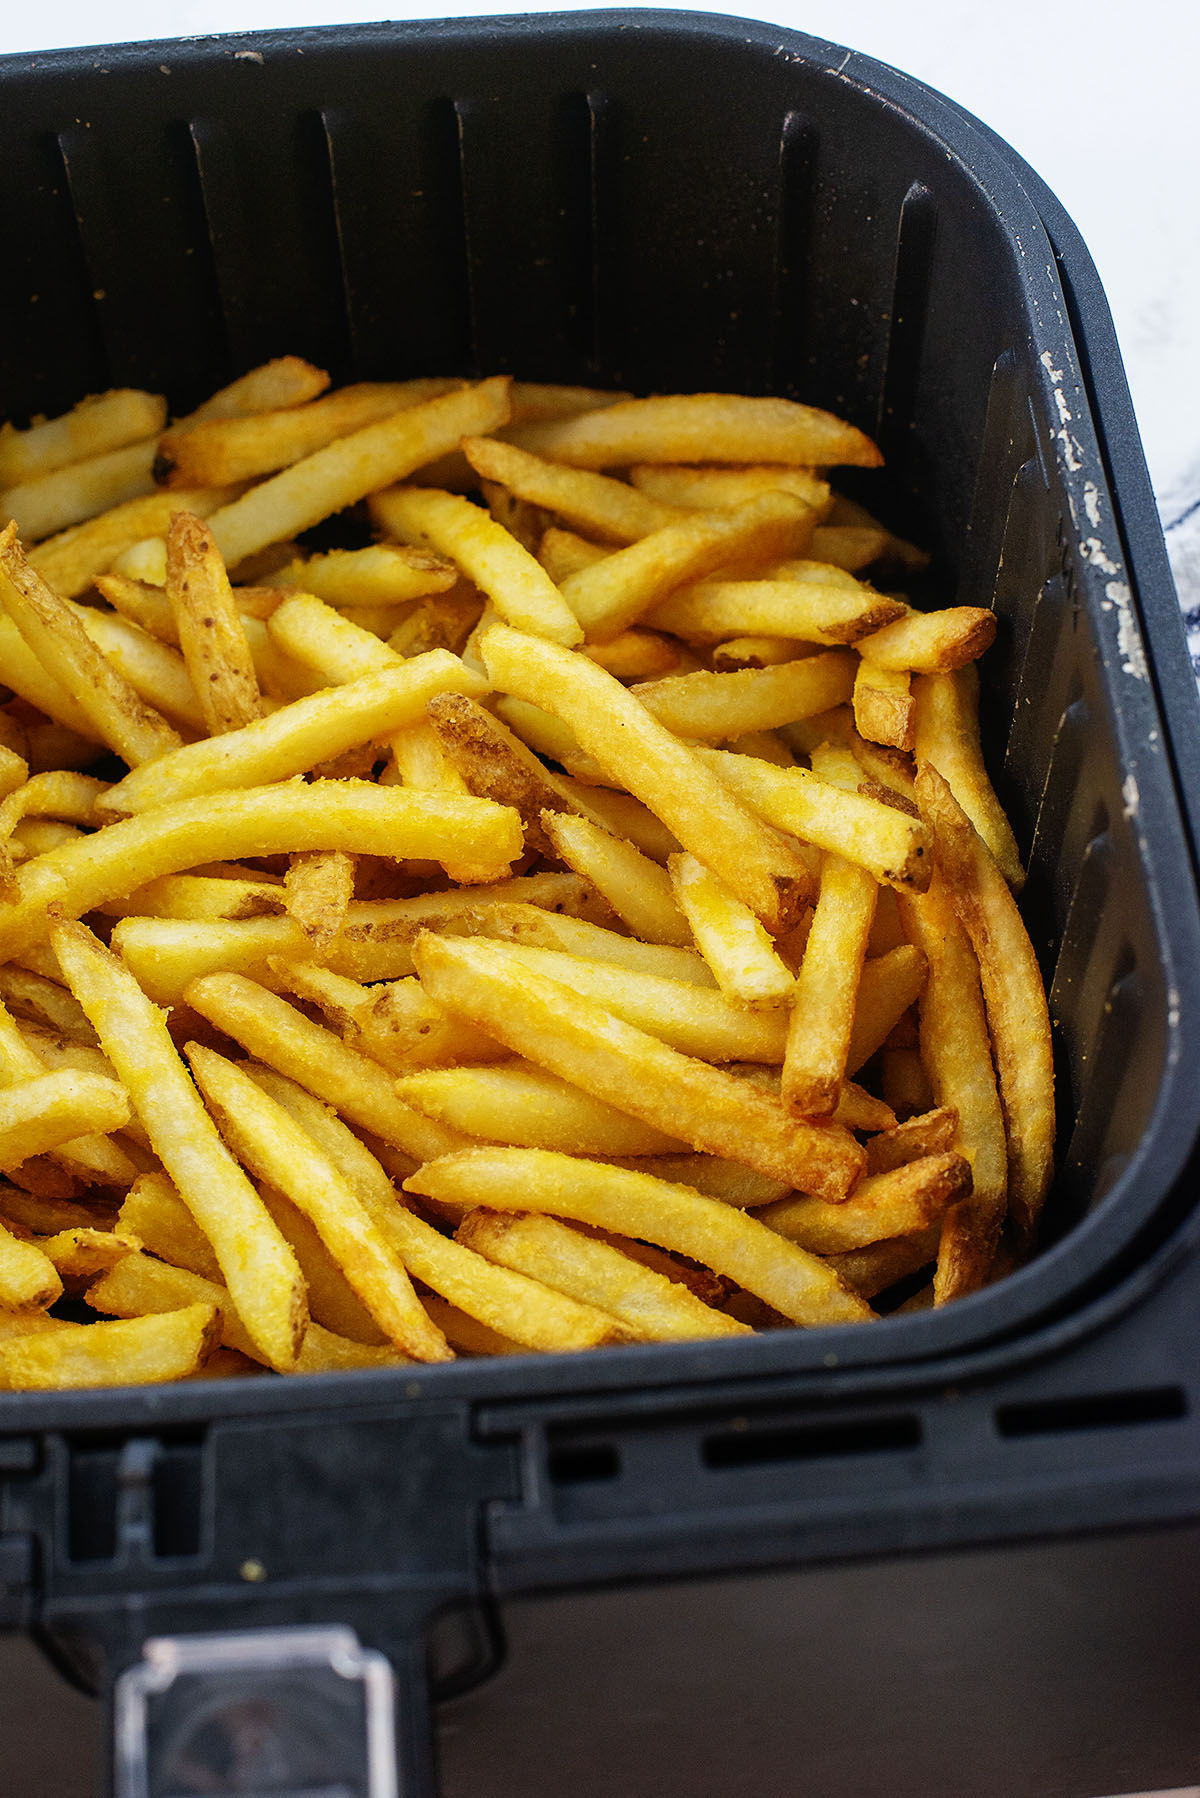 Cooked French fries in an air fryer basket.